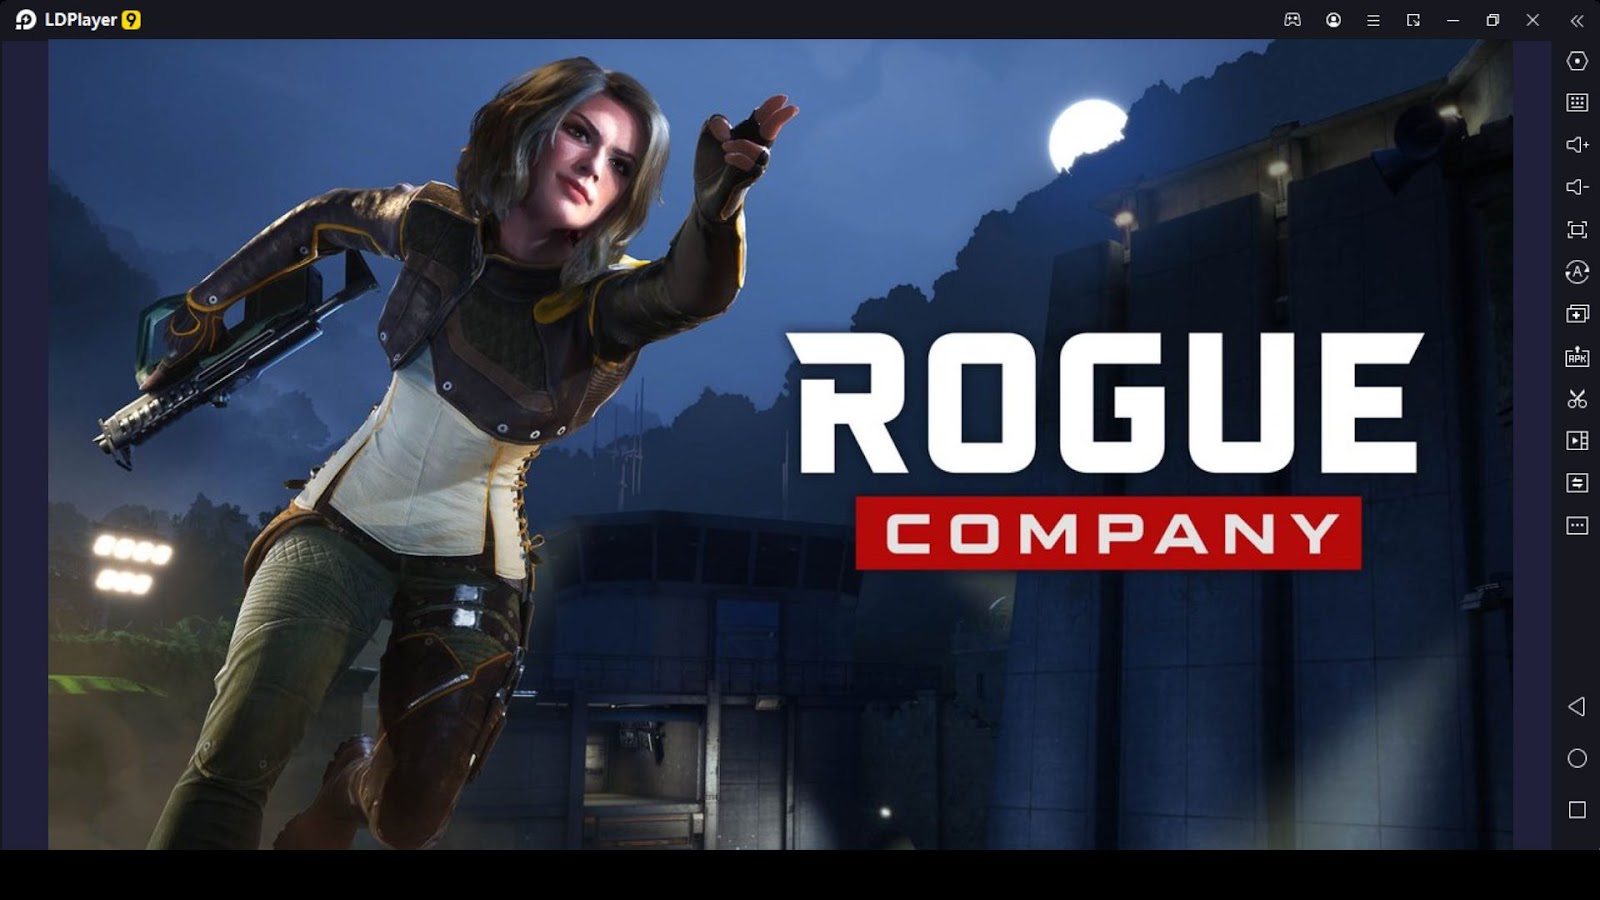 Pre-registration for Rogue Company: Elite is open now